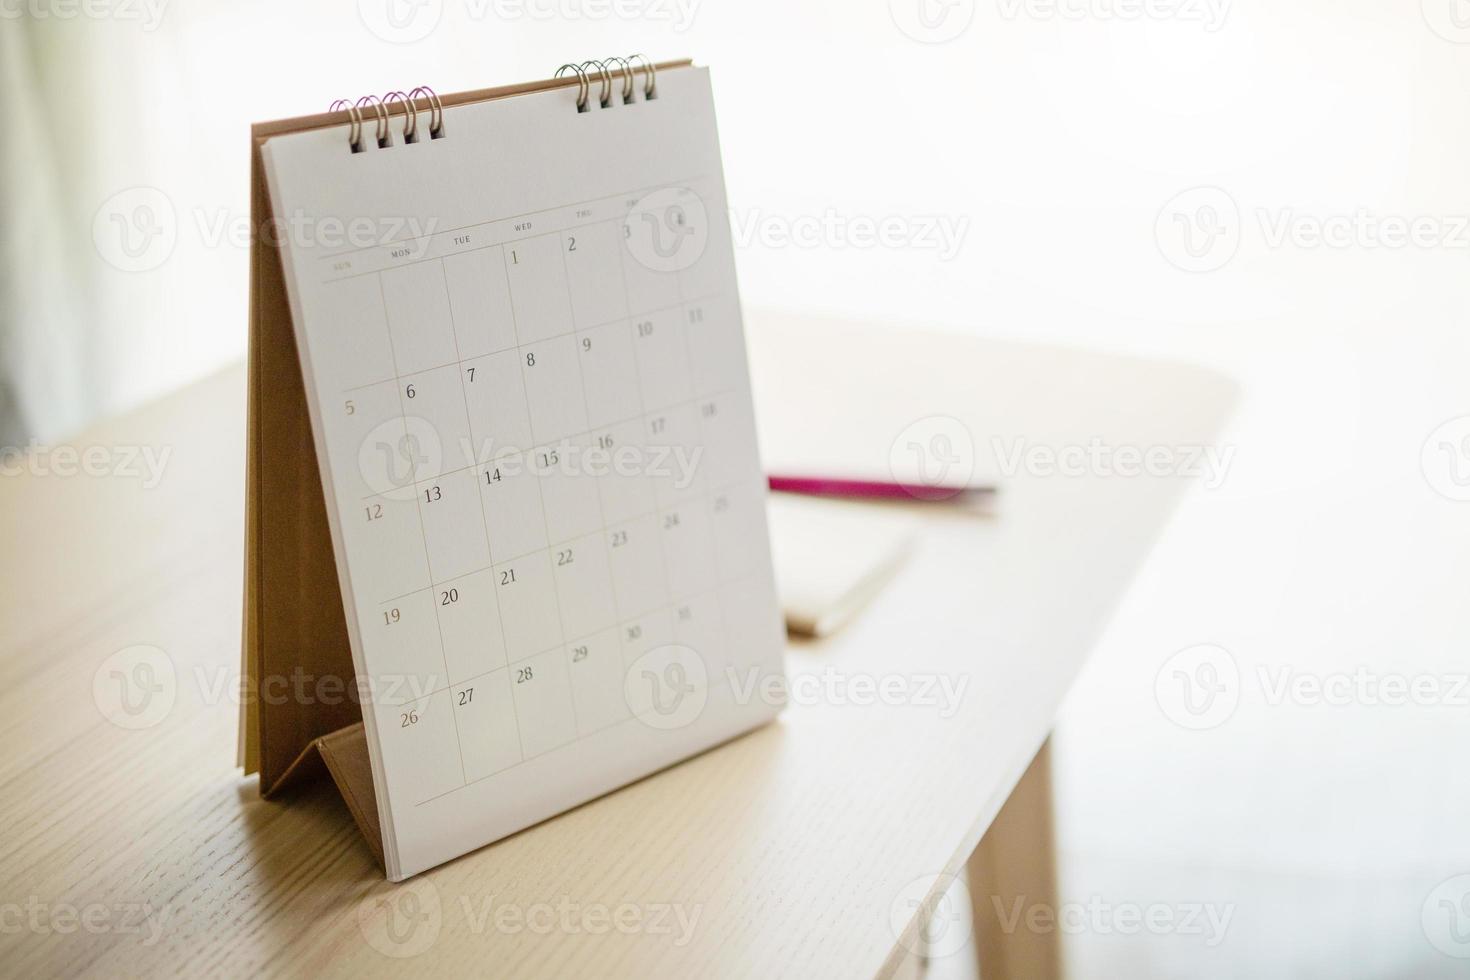 calendar page close up on wood table background with pen and notebook business planning appointment meeting concept photo